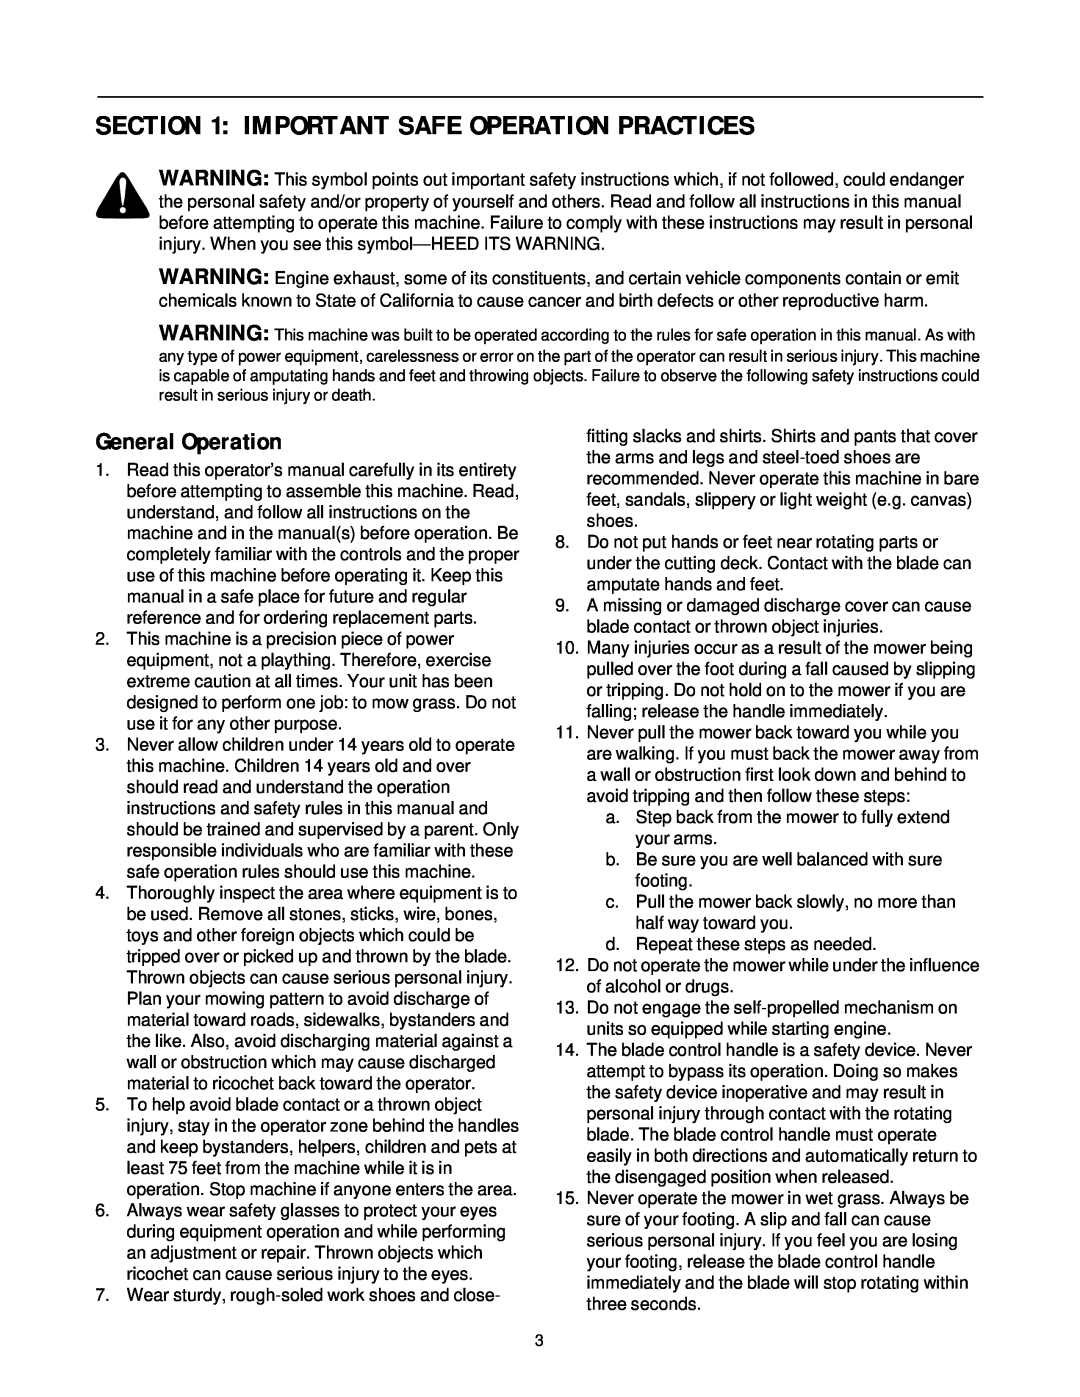 MTD 469 manual Important Safe Operation Practices, General Operation 